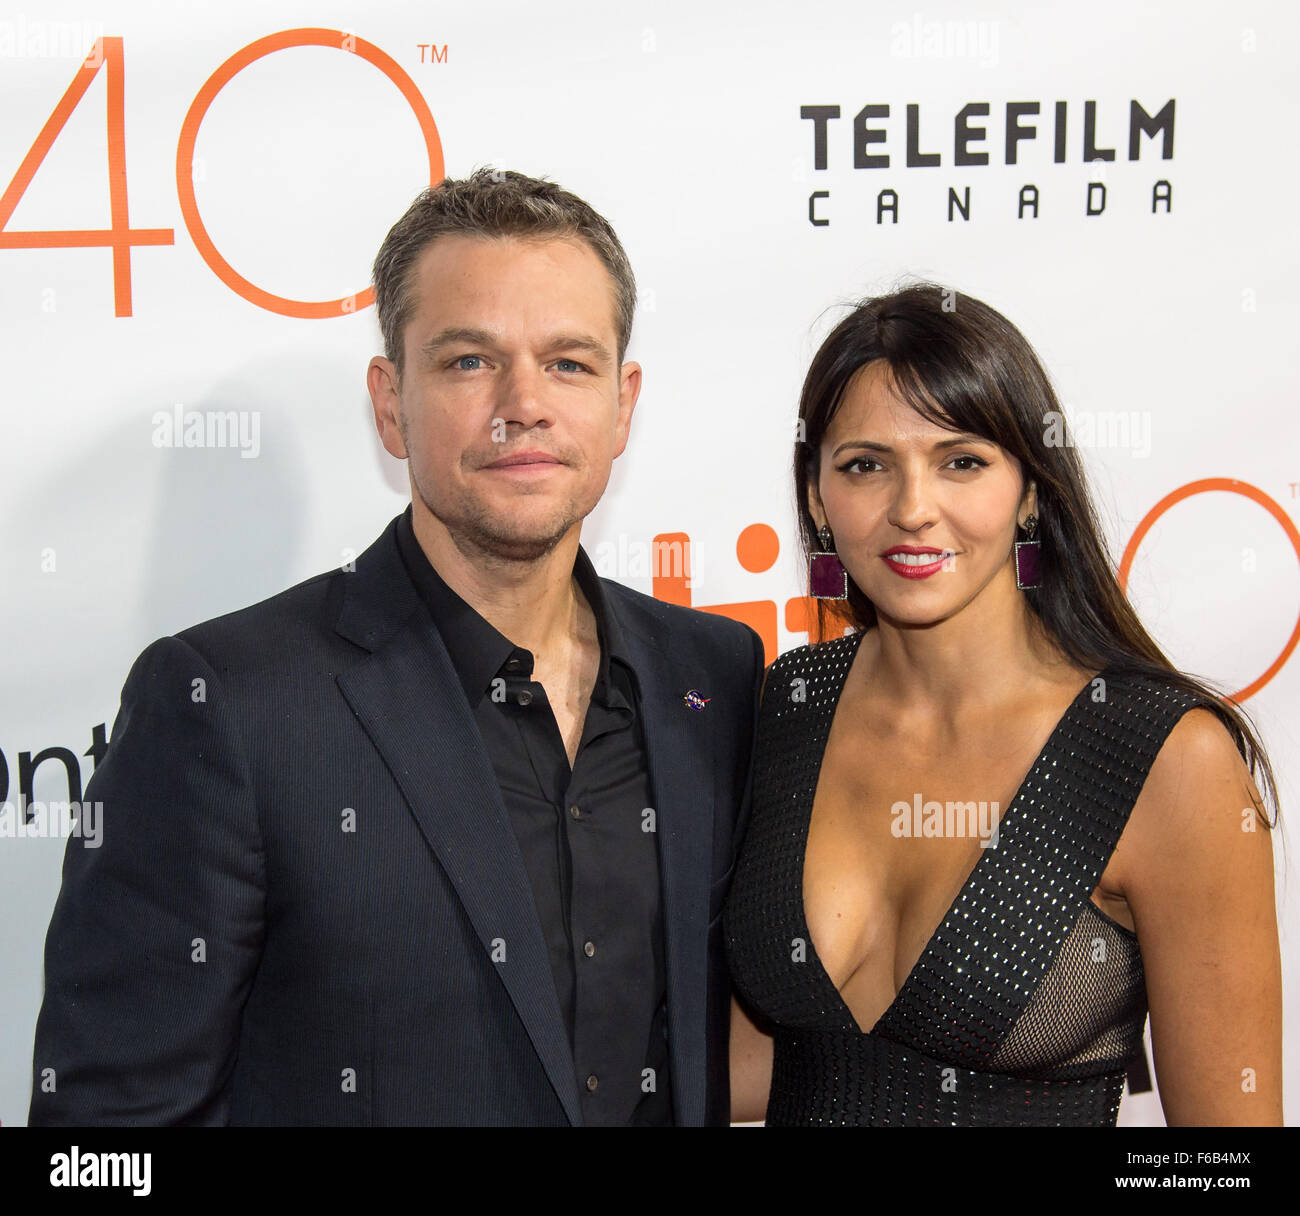 Actor Matt Damon and his wife Luciana Bozán Barroso attend the world premiere for 'The Martian” on day two of the Toronto International Film Festival at the Roy Thomson Hall Friday, Sept. 11, 2015 in Toronto. NASA scientists and engineers served as technical consultants on the film. The movie portrays a realistic view of the climate and topography of Mars, based on NASA data, and some of the challenges NASA faces as we prepare for human exploration of the Red Planet in the 2030s. Photo Credit: (NASA/Bill Ingalls) Stock Photo